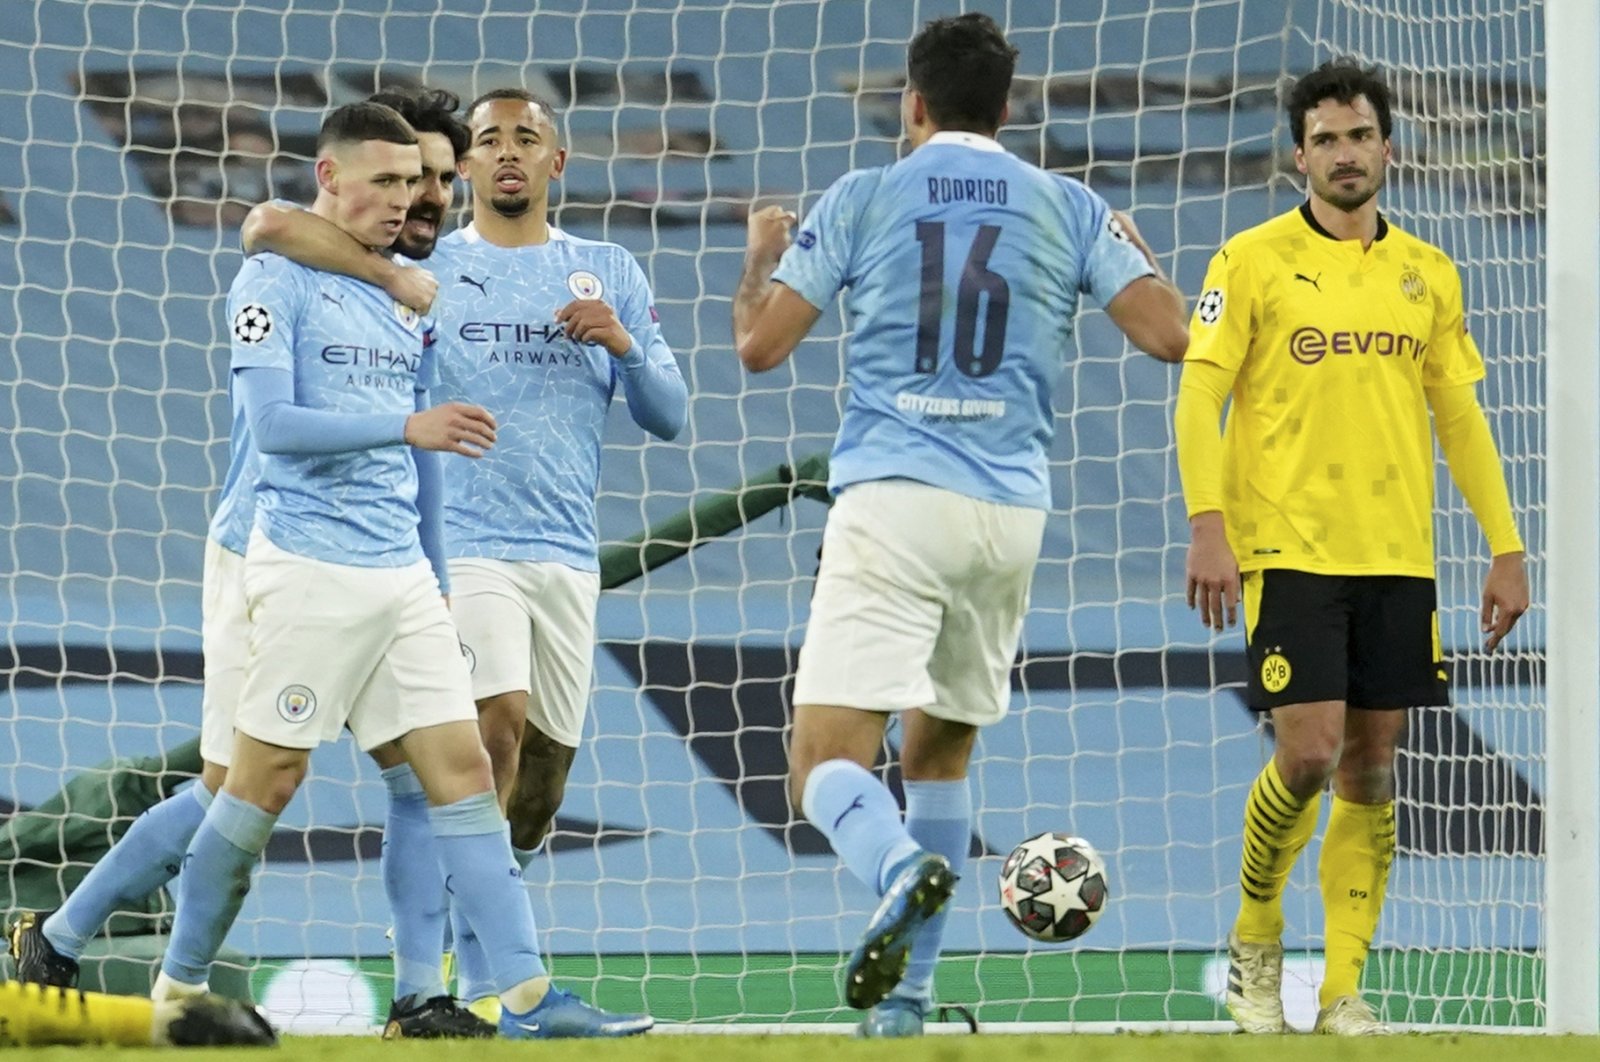 Manchester City's Phil Foden (L) celebrates after scoring his side's second goal during the Champions League, first leg, quarterfinal football match between Manchester City and Borussia Dortmund at the Etihad stadium in Manchester, Tuesday, April 6, 2021. (AP Photo)